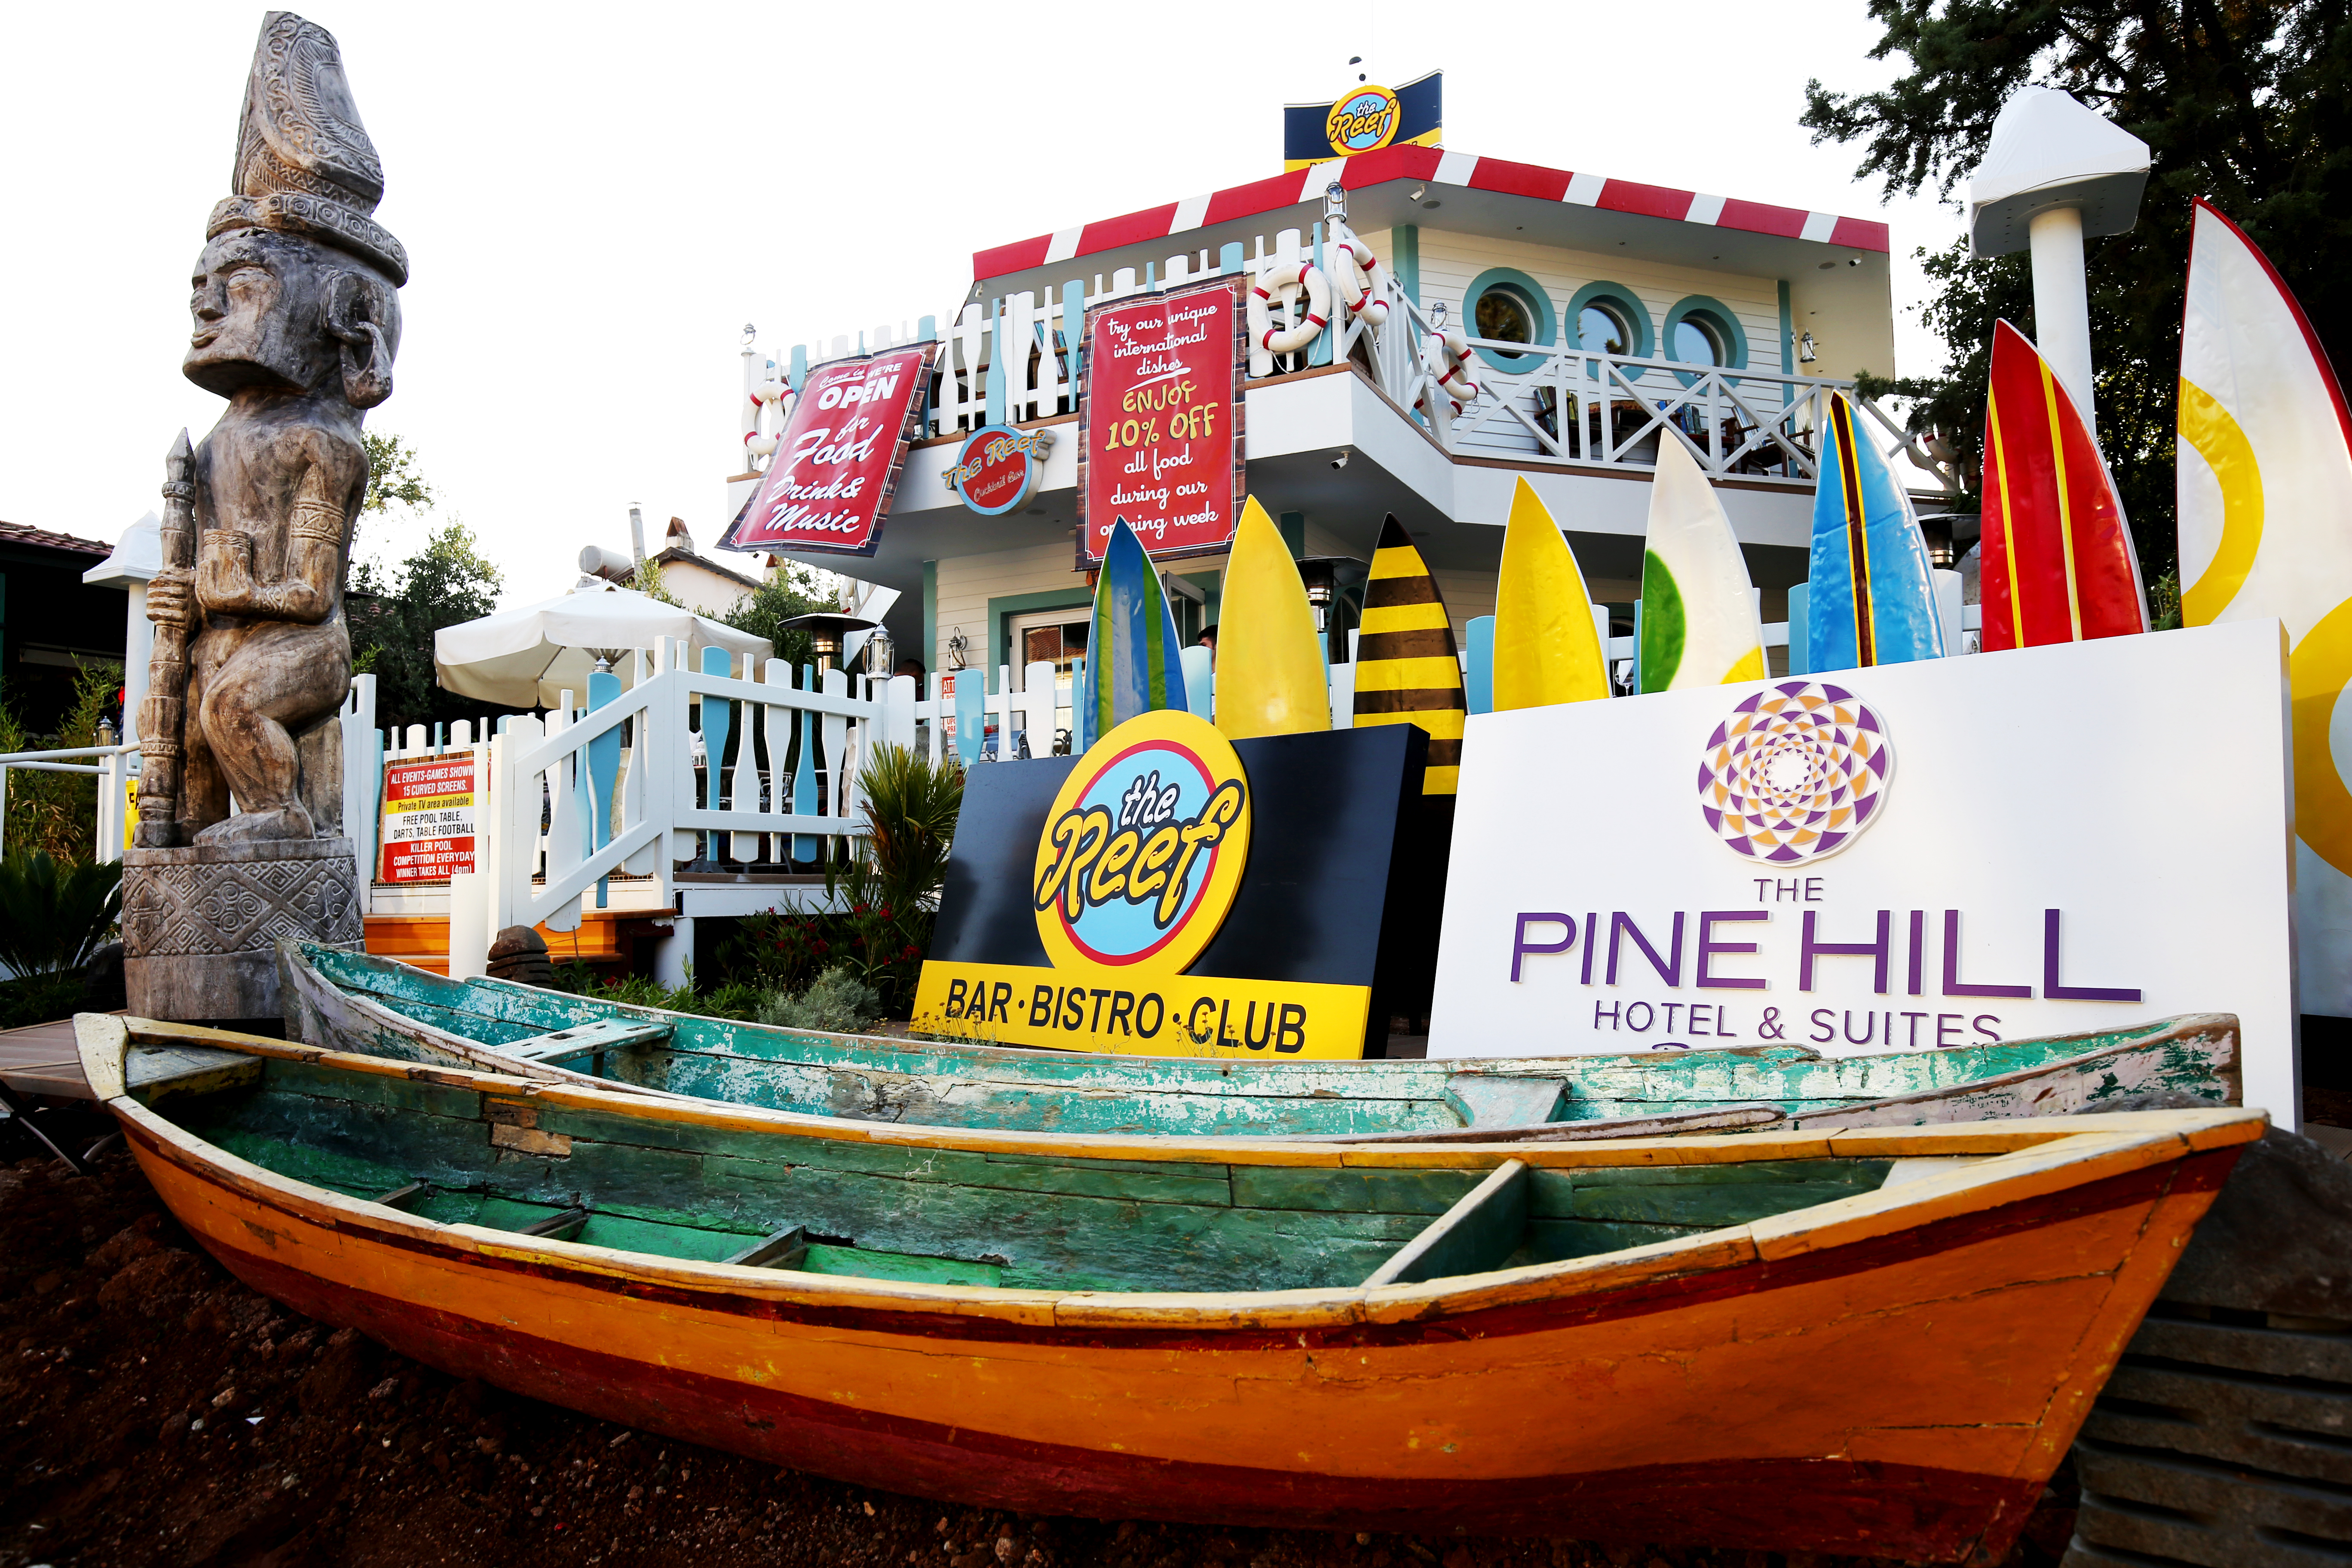 The Pinehill Hotel & Suites